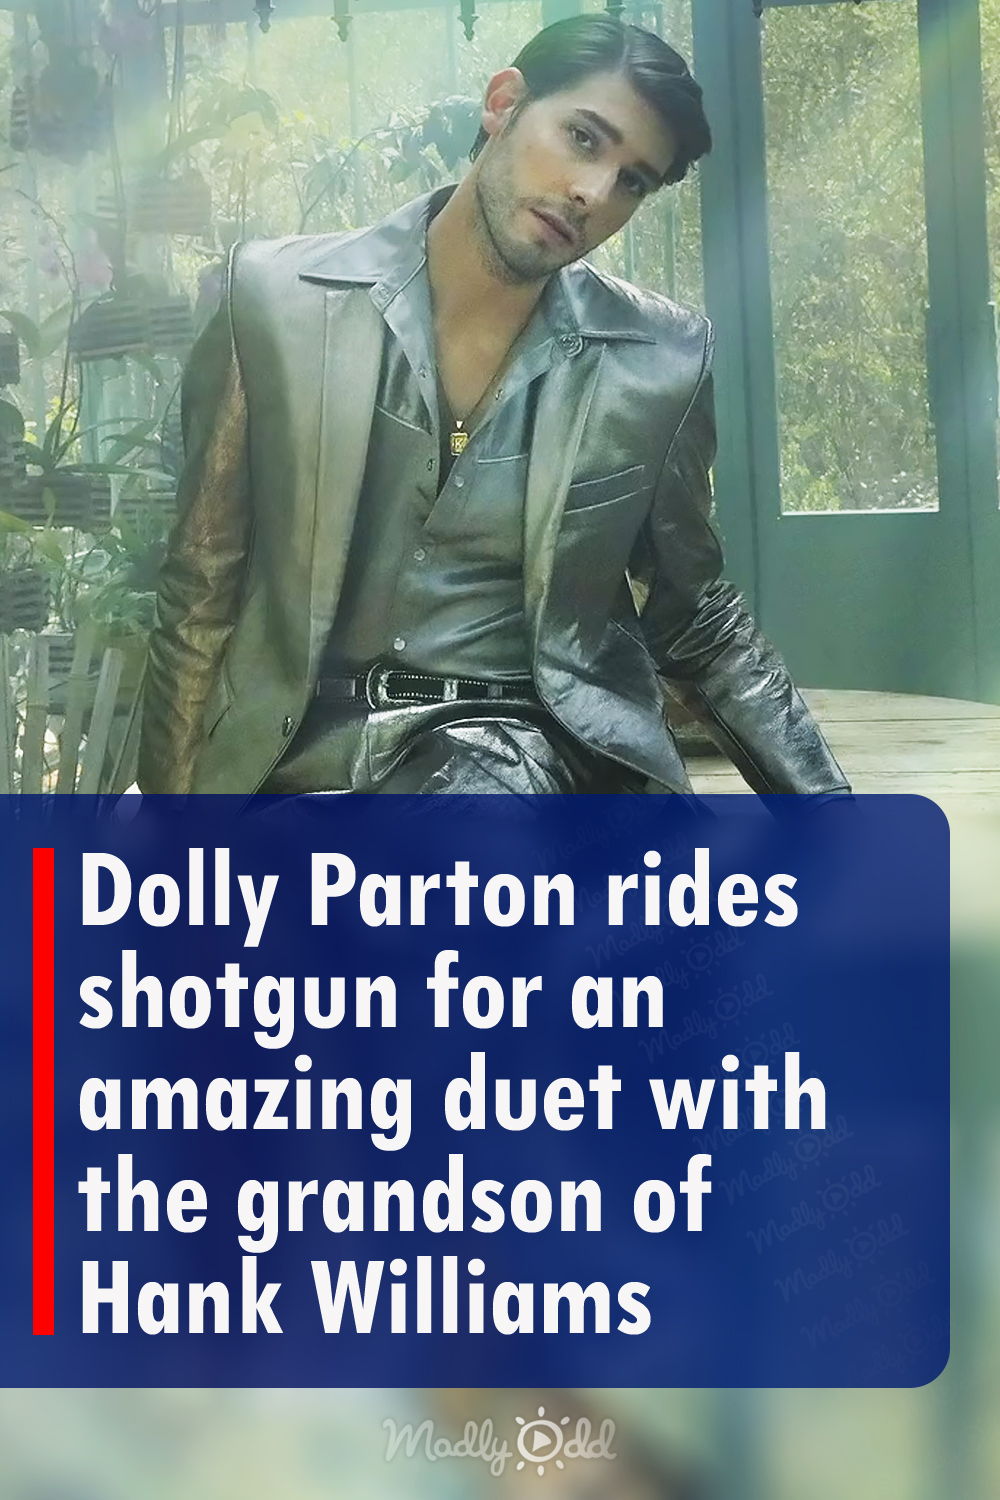 Dolly Parton rides shotgun for an amazing duet with the grandson of Hank Williams